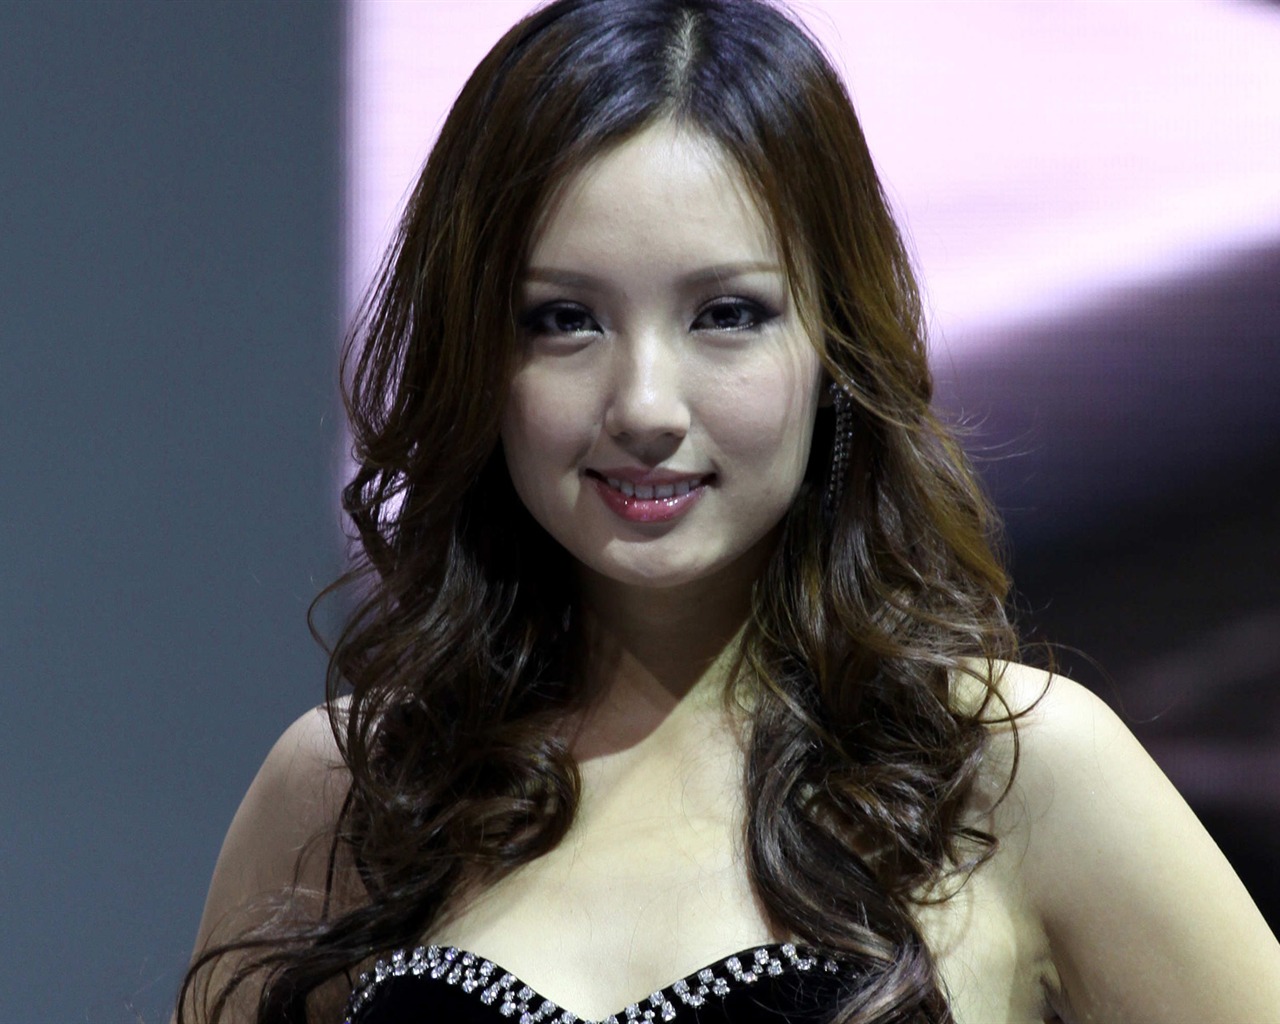 2010 Beijing Auto Show car models Collection (2) #5 - 1280x1024